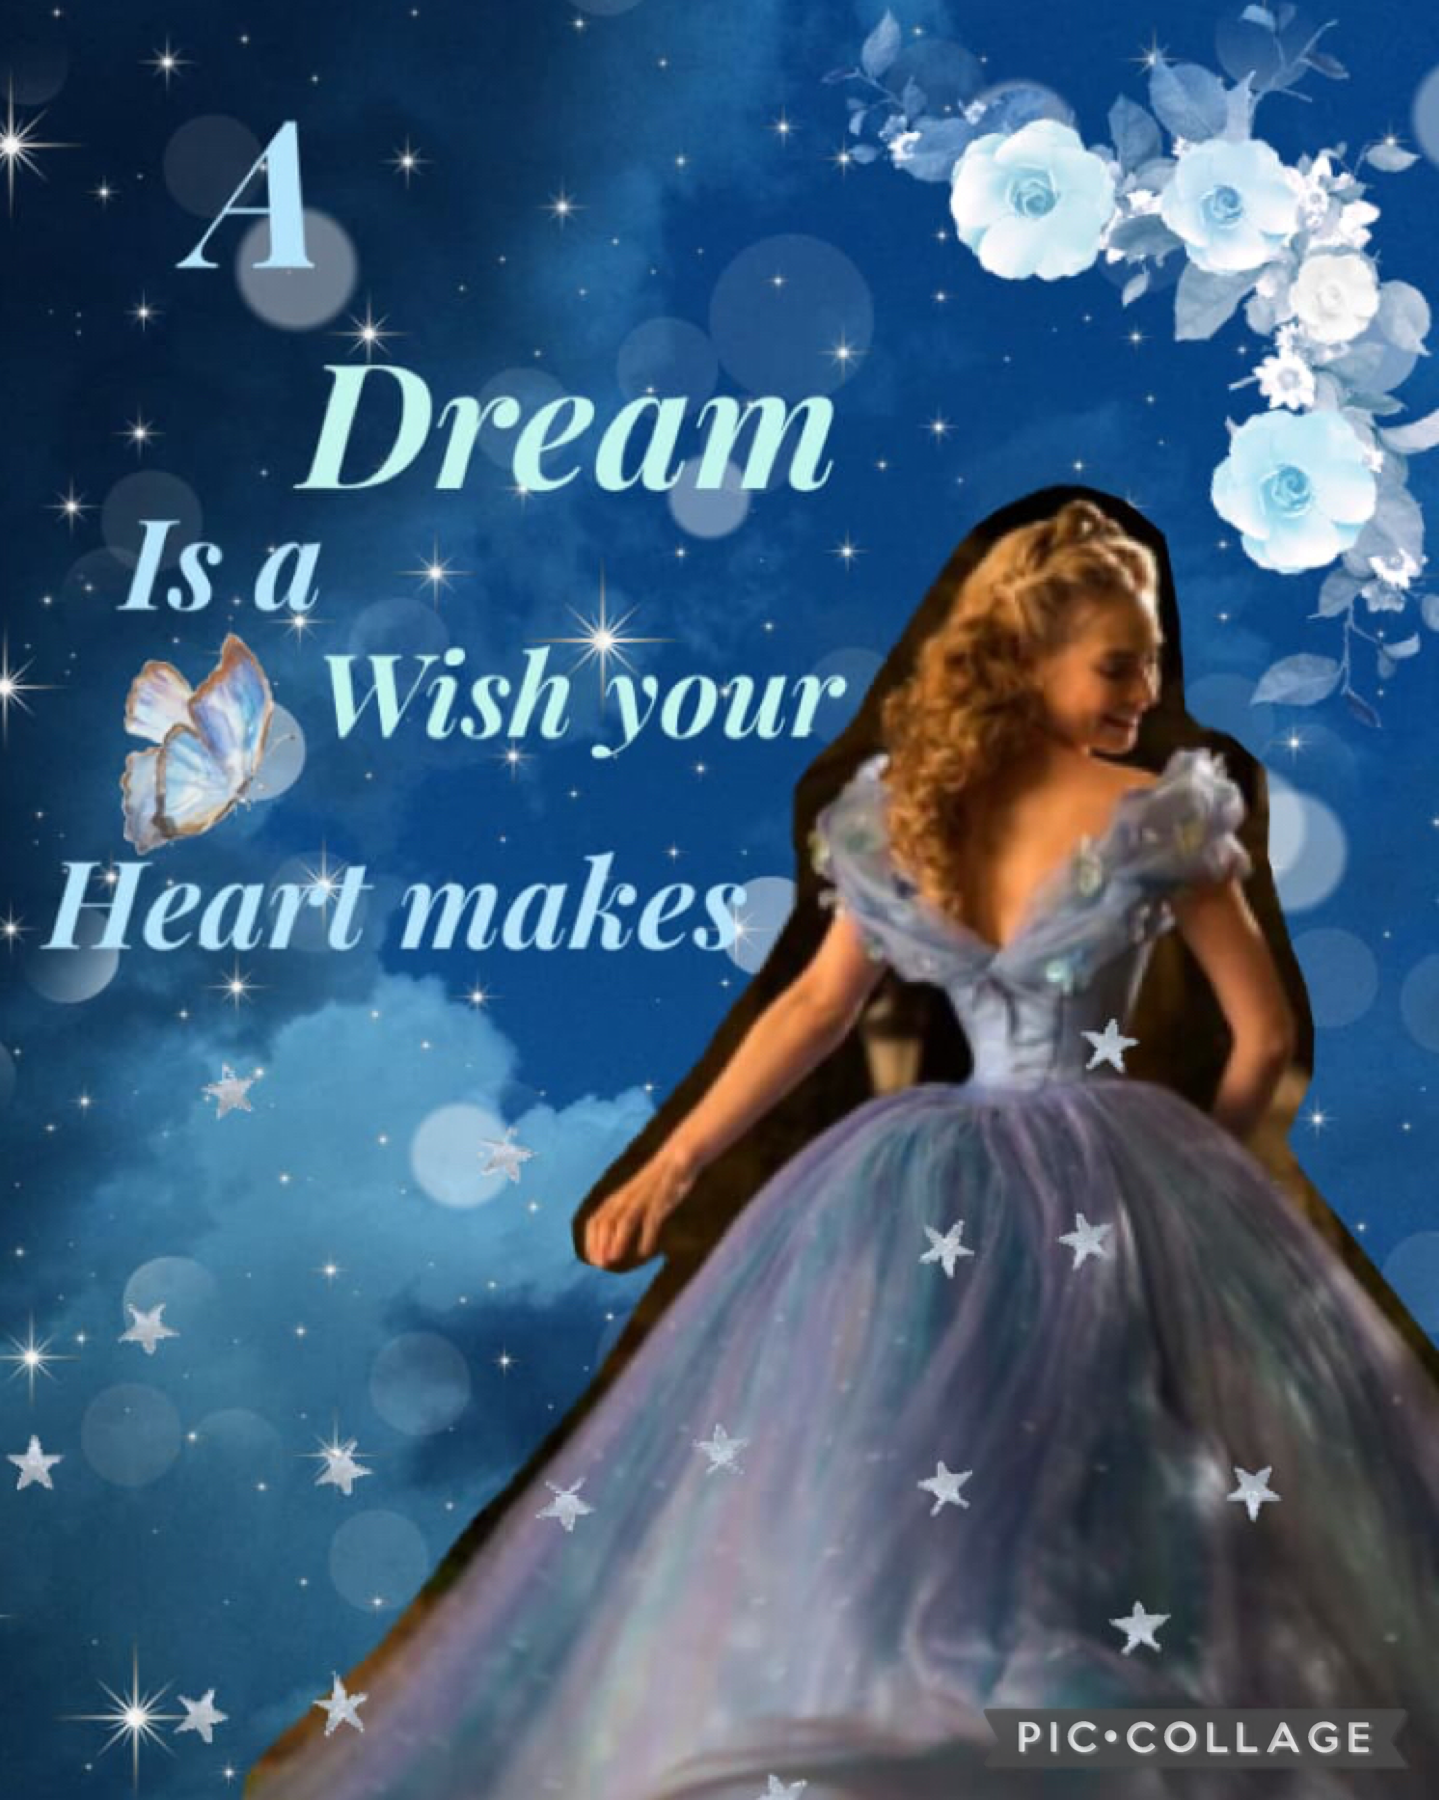 20.5.22 Cinderella blue aesthetic collage and entry to Watermelonsugarvol6 contest